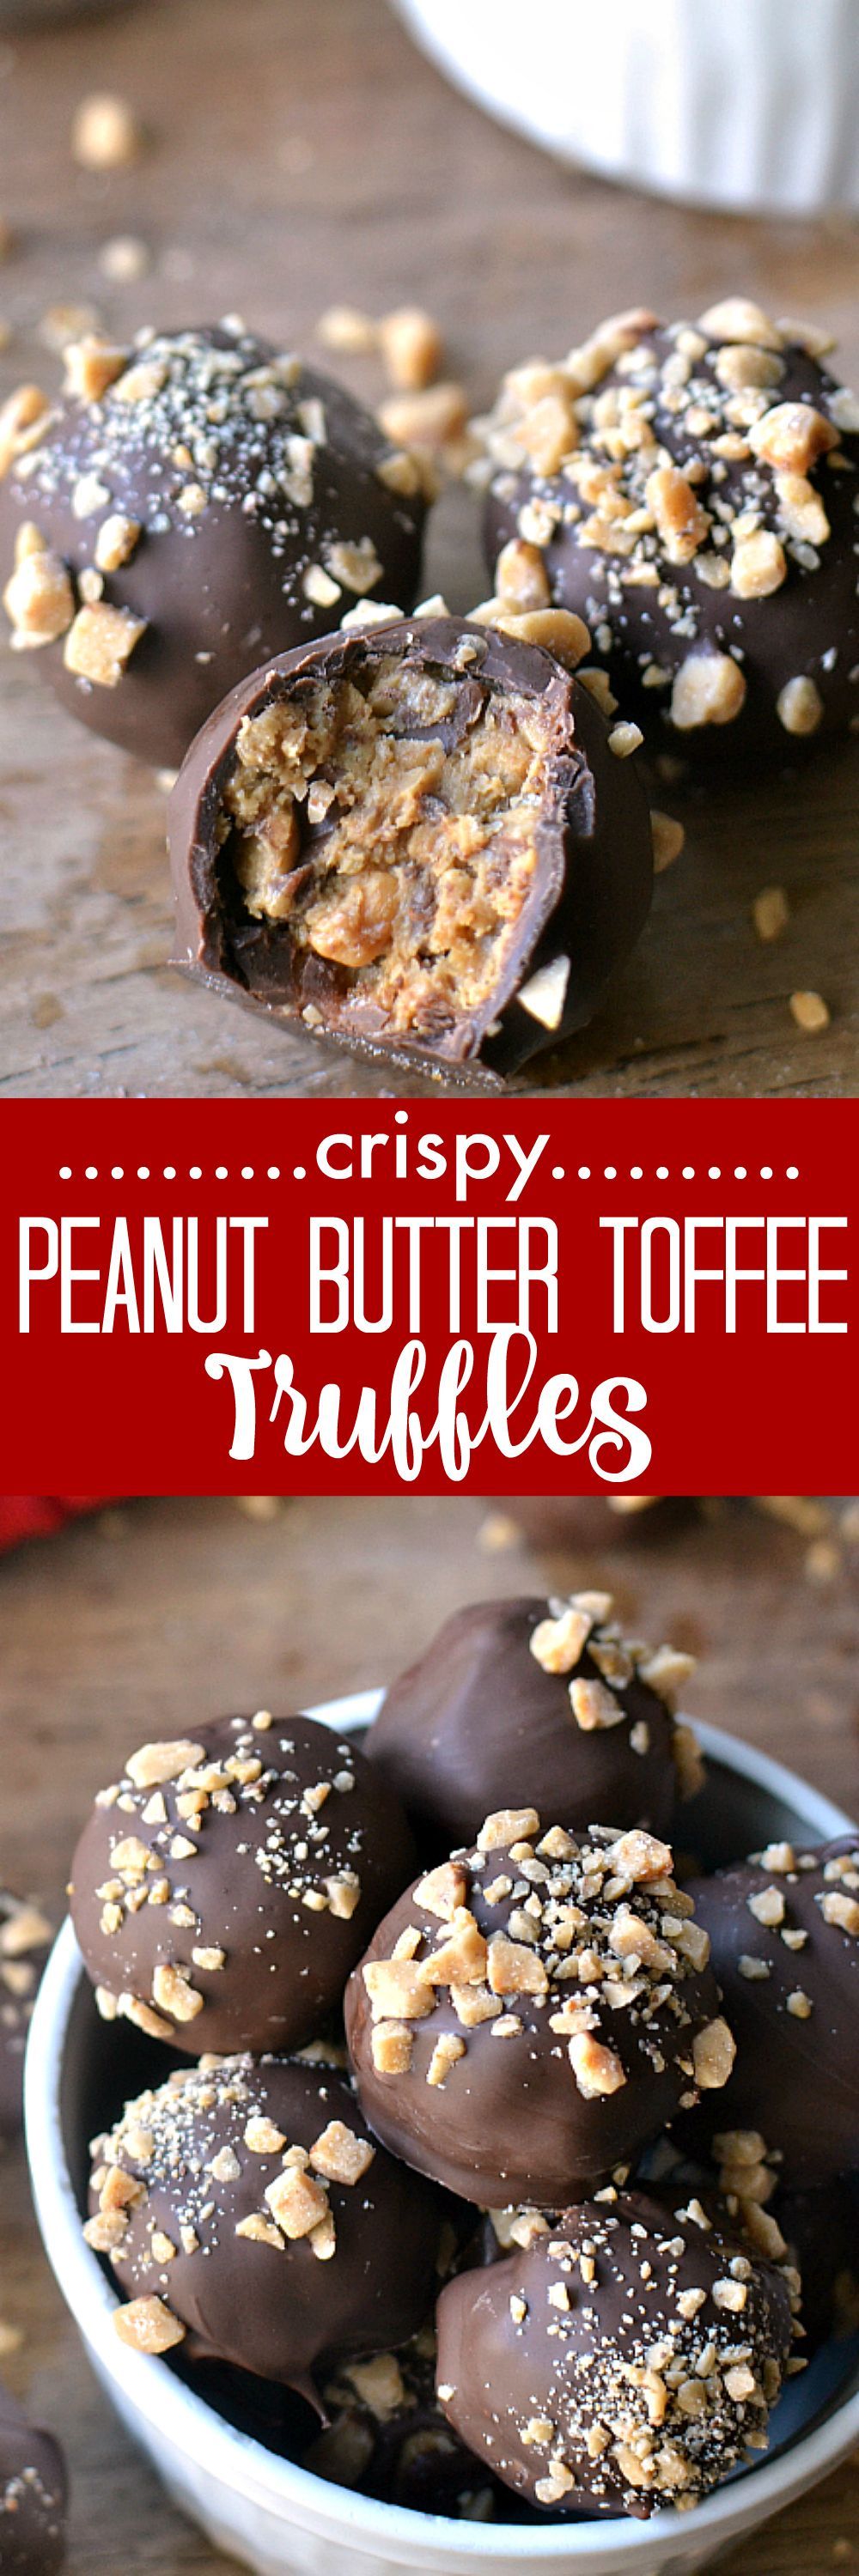 Crispy Peanut Butter Toffee Truffles – these make the BEST gifts!